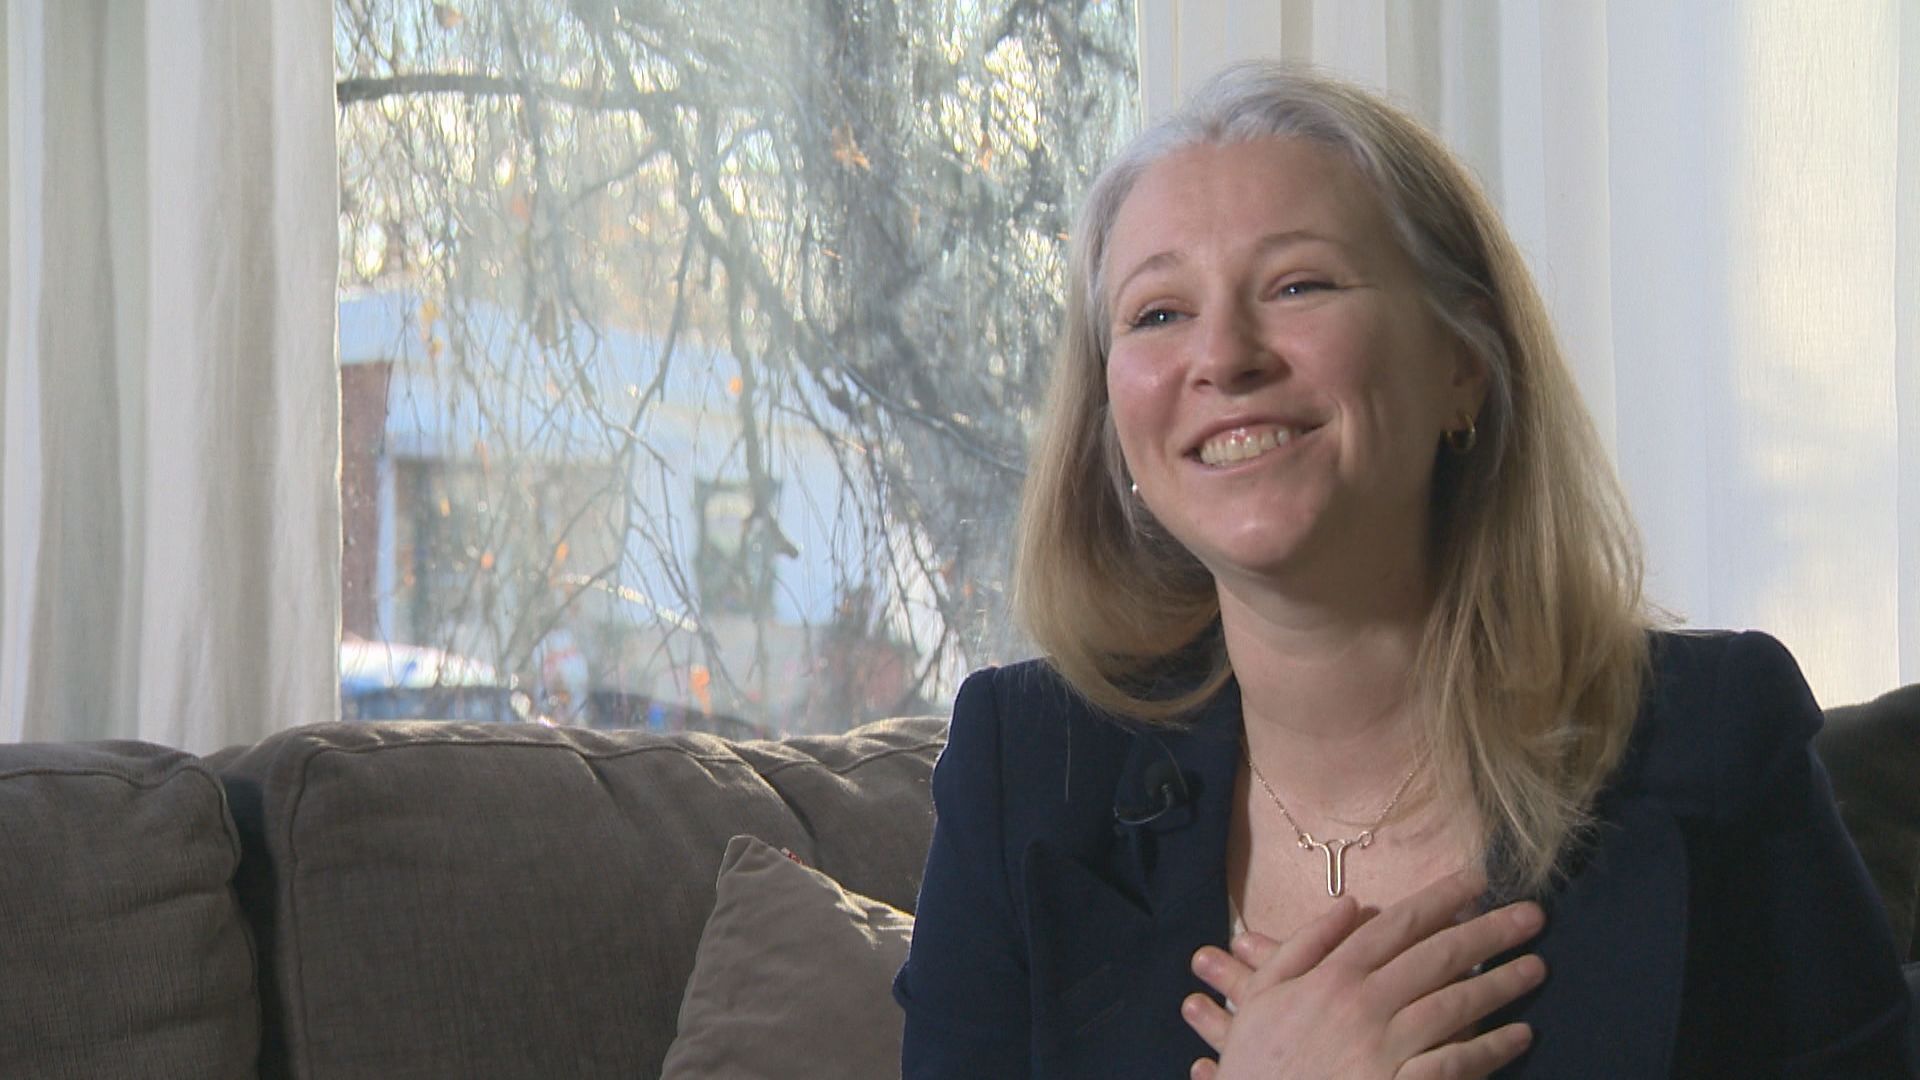 ‘I’m back’: Quebec mother with brain tumour gets life-saving surgery in U.S.